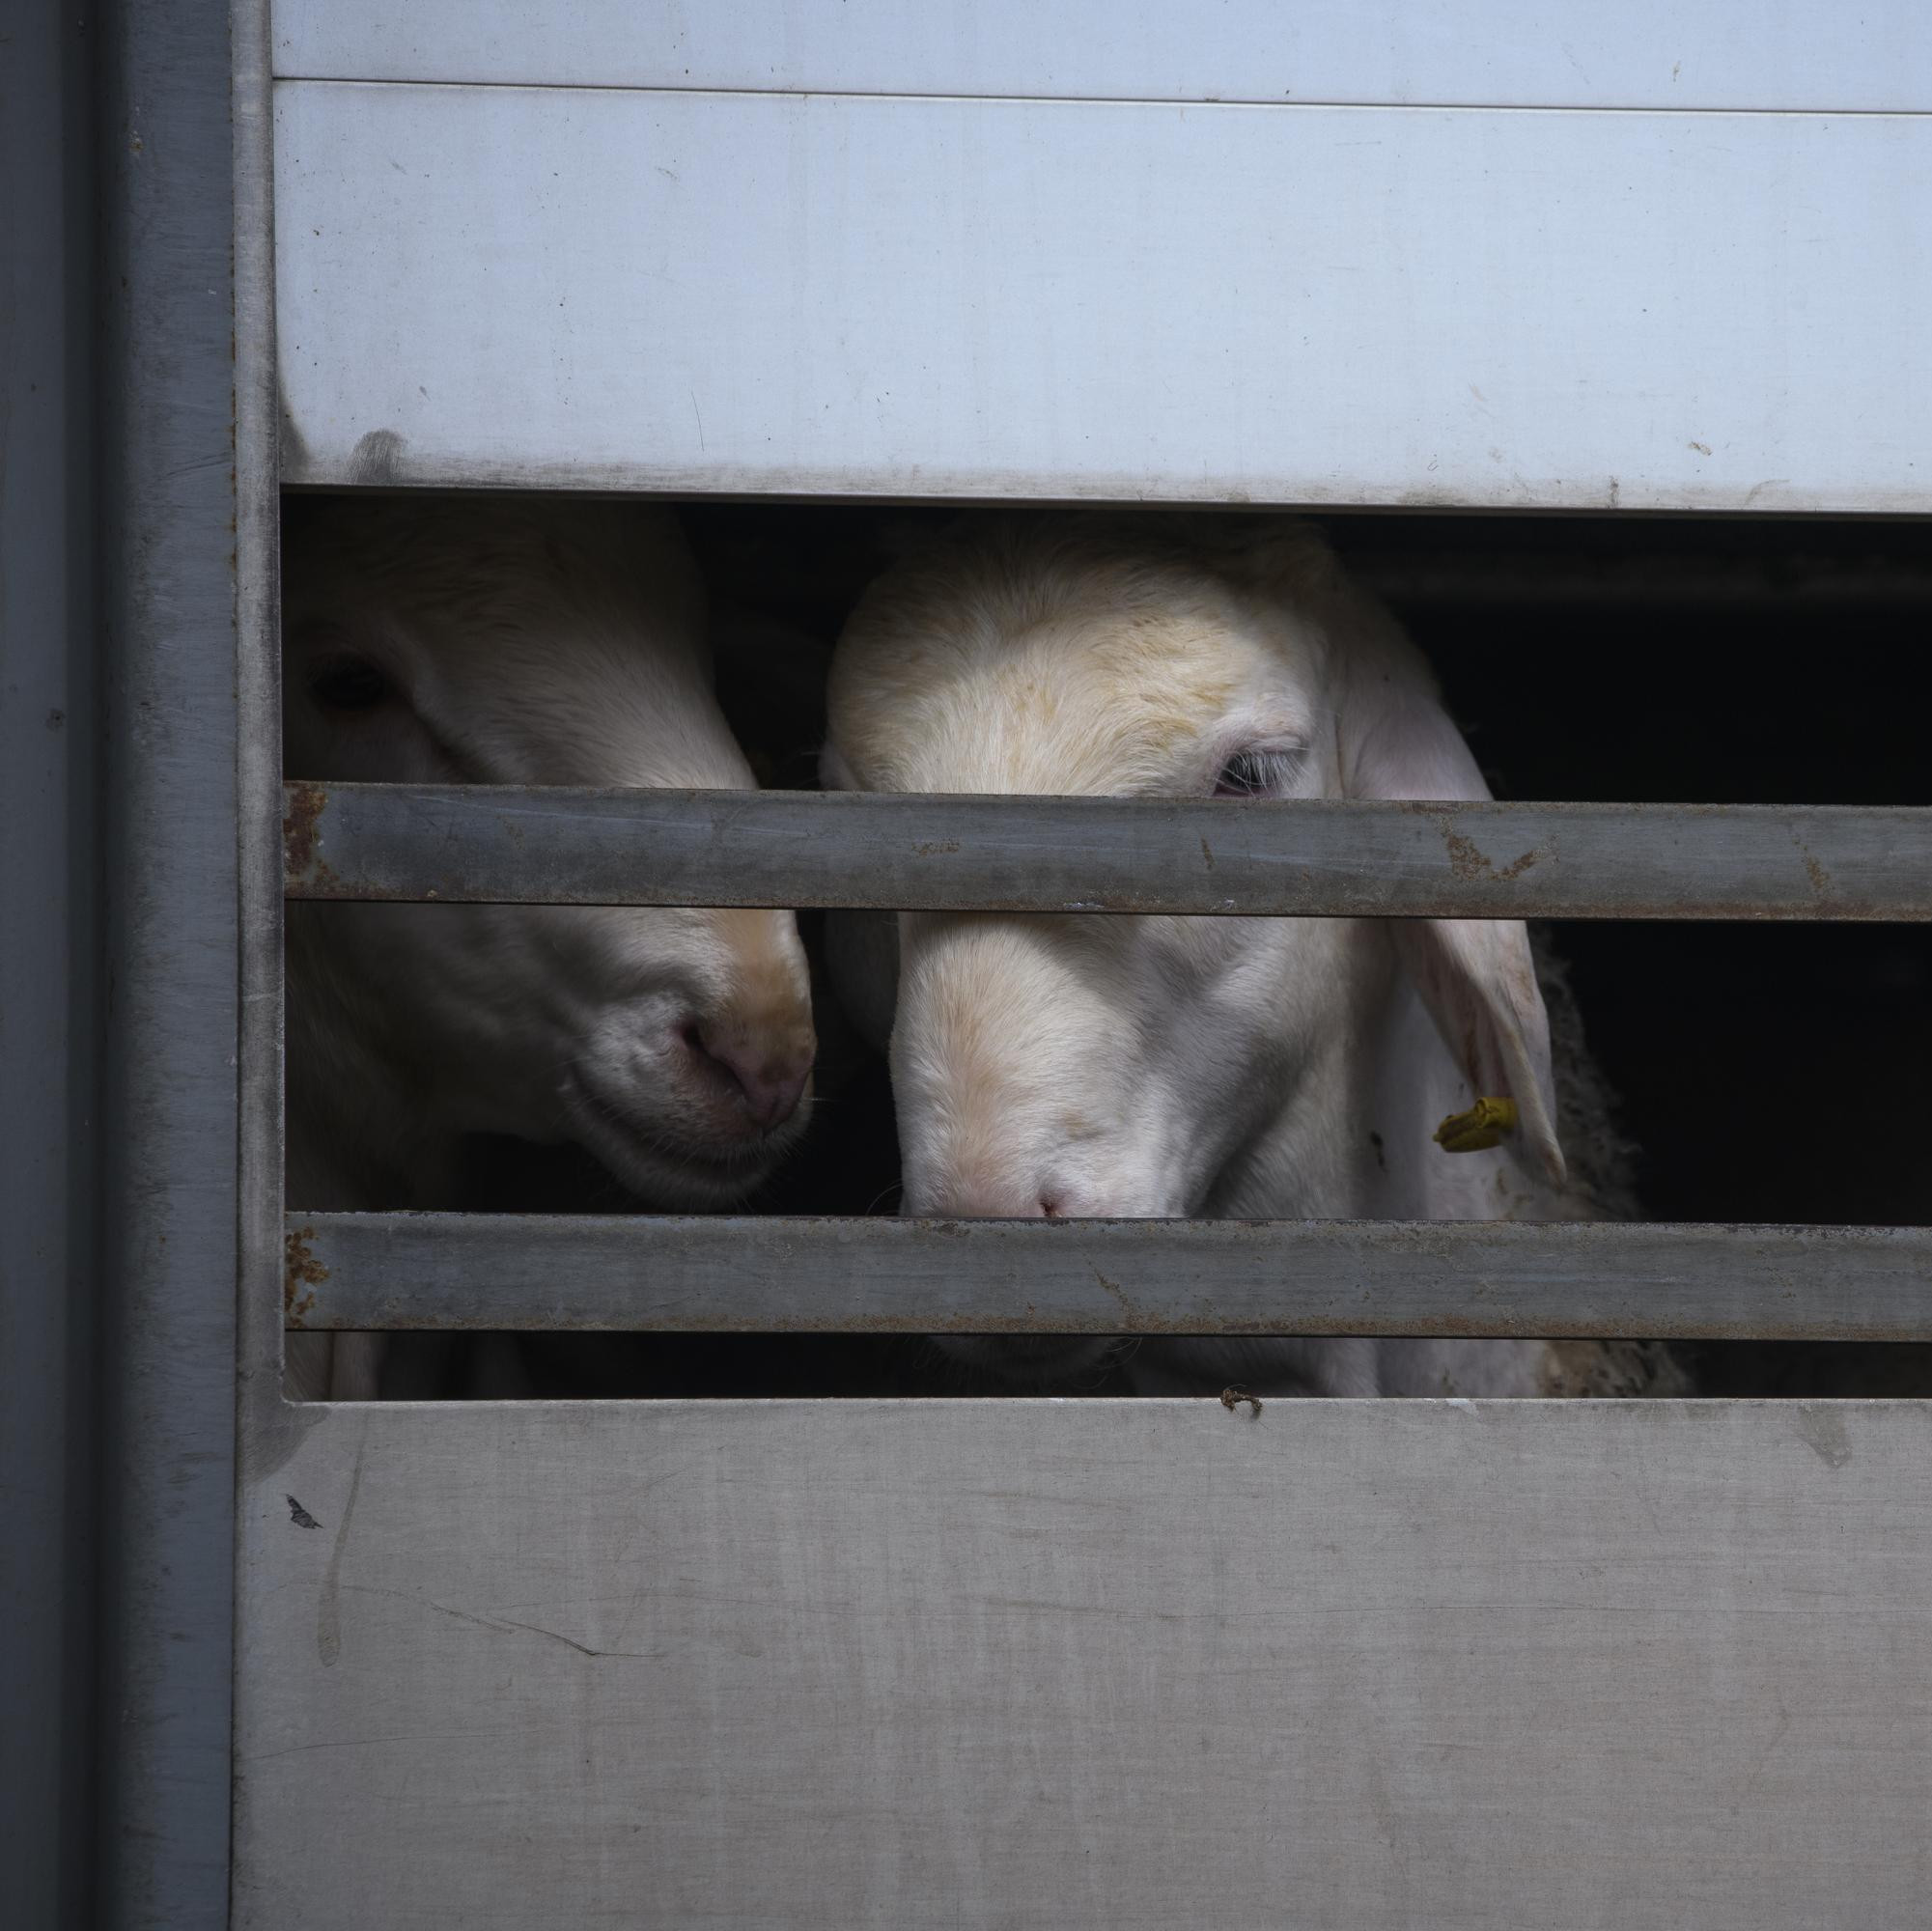 Sheep in a transport truck